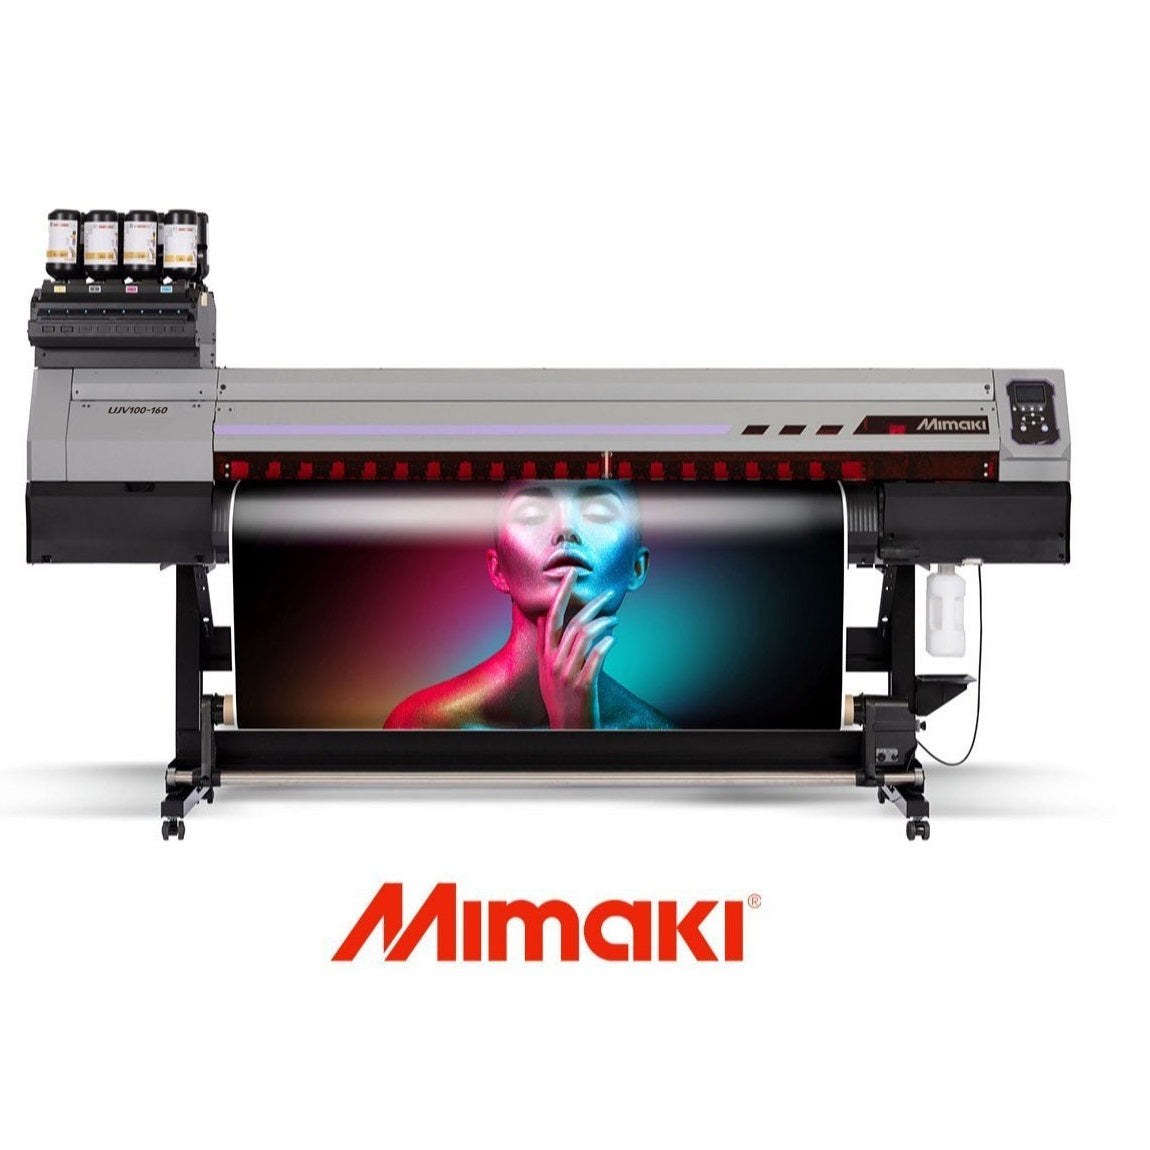 Absolute Toner Brand New Mimaki UJV100-160 64" Inch UV-LED Roll to Roll Inkjet Printer With Dot Adjustment System (DAS) Printers/Copiers